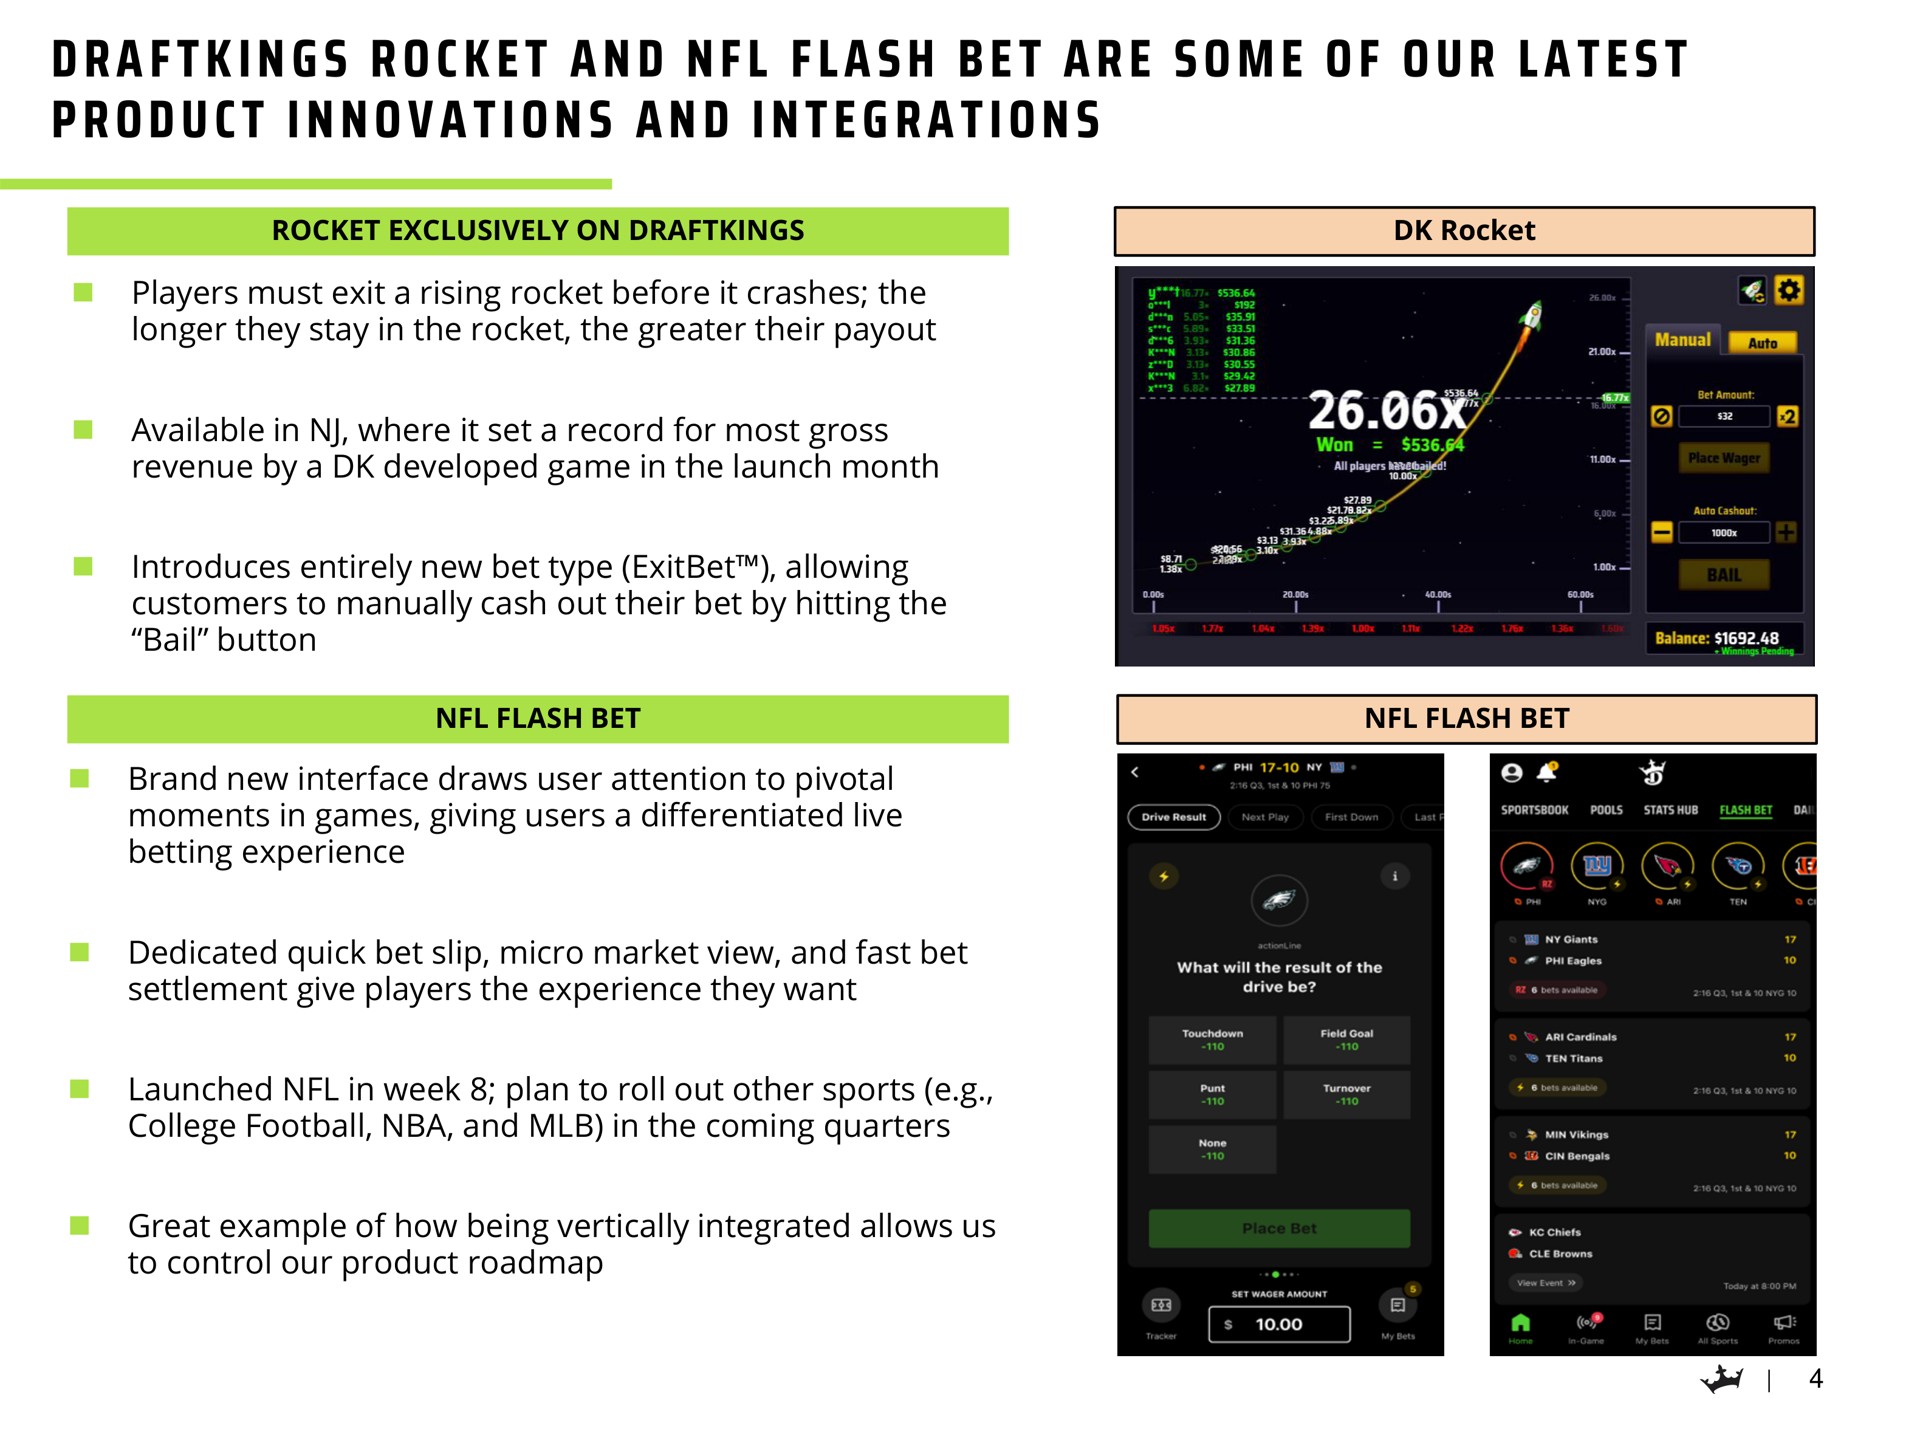 a i a a a a i a i a i a i rocket and flash bet are some of our latest product innovations and integrations | DraftKings